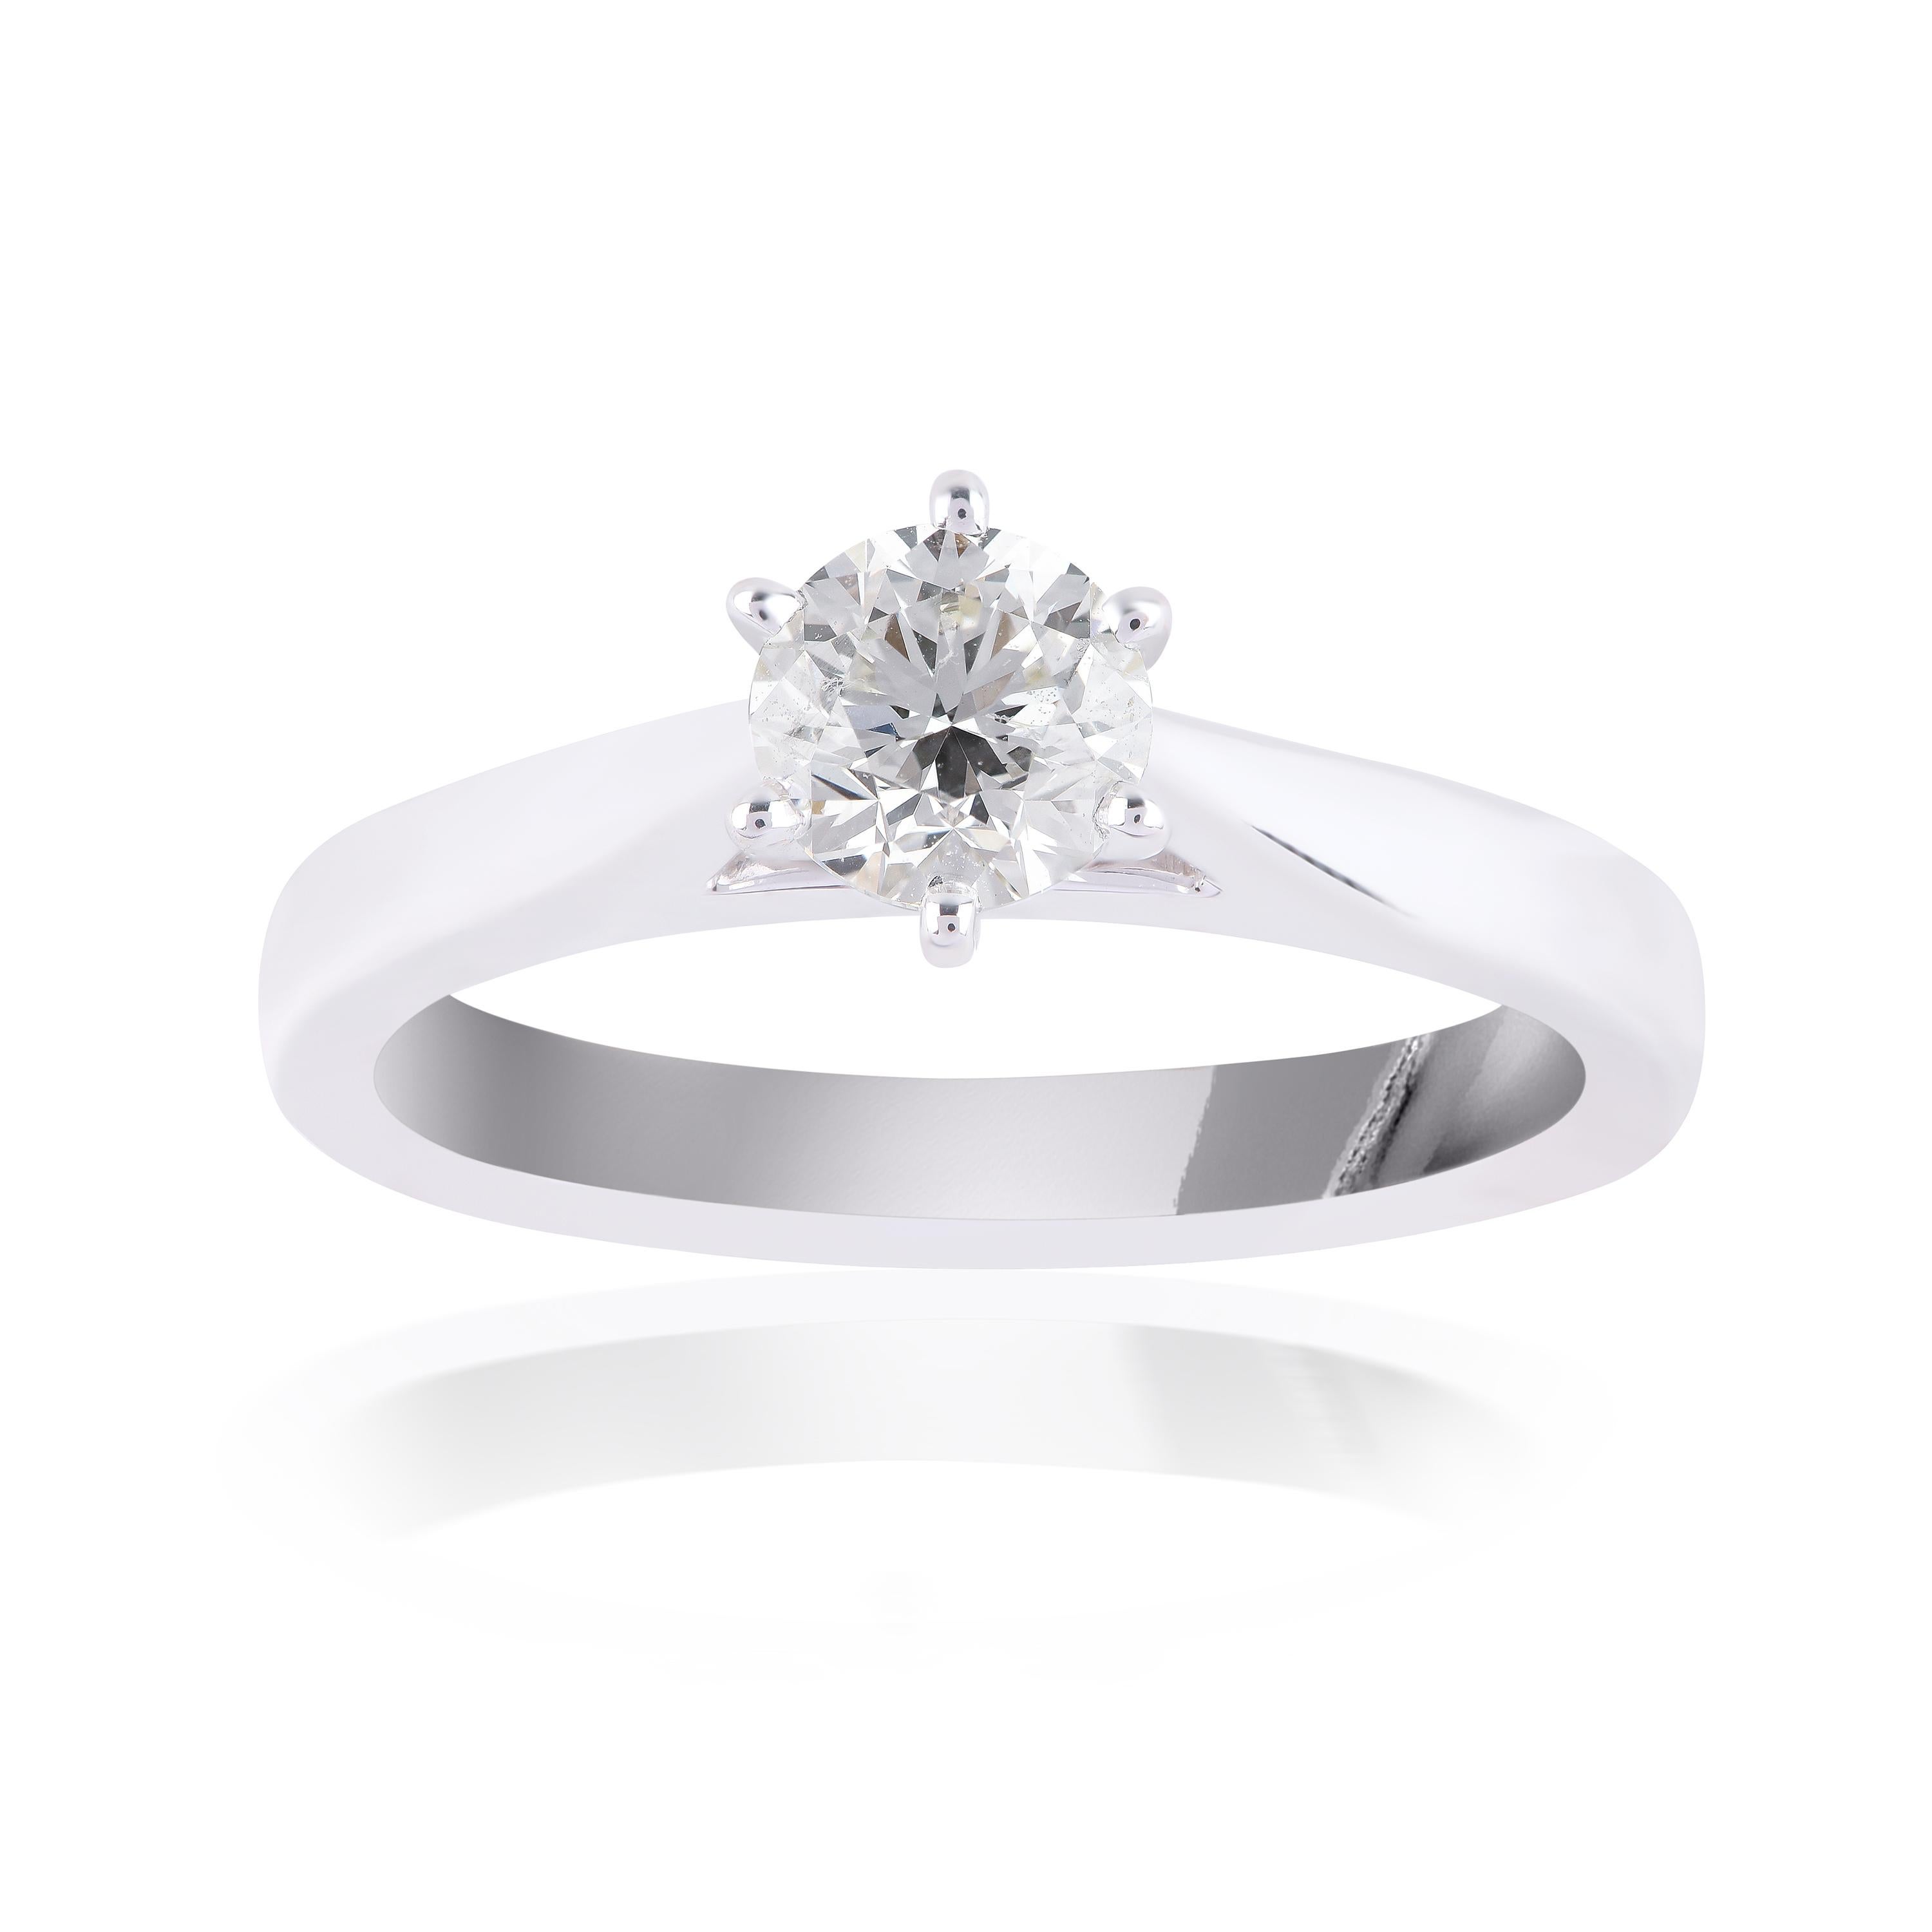 This beautiful wedding ring is made in 18-karat white gold and accentuated with 1 brilliant cut diamond in prong setting. The diamond is graded G-H Color, VS Clarity.